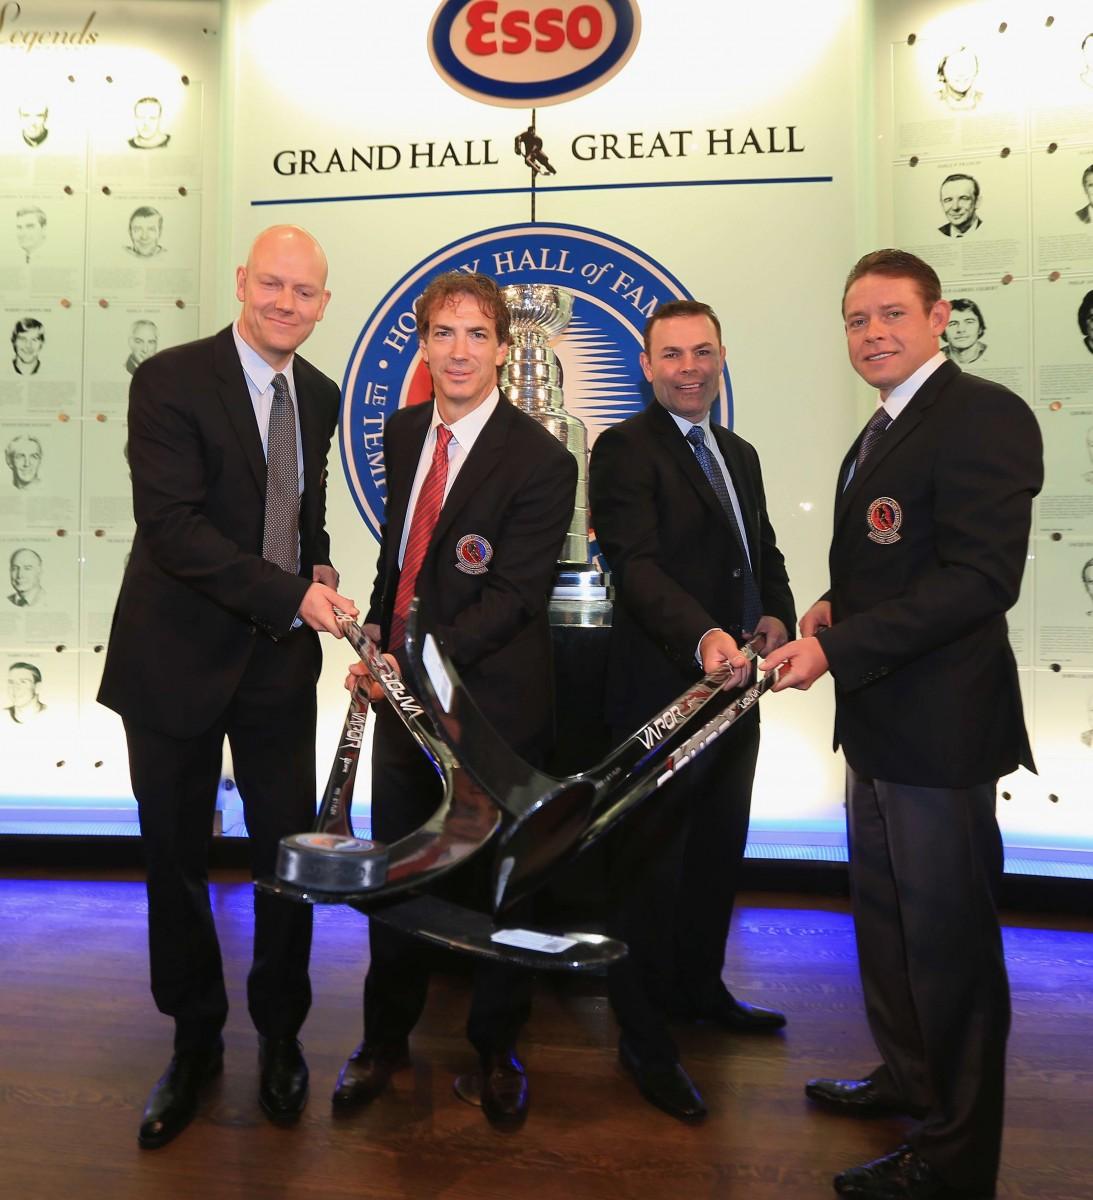 <a><img class="size-full wp-image-1774565" title="2012 Hockey Hall Of Fame Induction - Photo Opportunity" src="https://www.theepochtimes.com/assets/uploads/2015/09/Hockey156254739.jpg" alt="From left to right, Mats Sundin, Joe Sakic, Adam Oates, and Pavel Bure pose at the Hockey Hall of Fame in Toronto on Nov. 12, 2012. All four were inducted into the Hall of Fame on Monday night. (Bruce Bennett/Getty Images)" width="1093" height="1200"/></a>